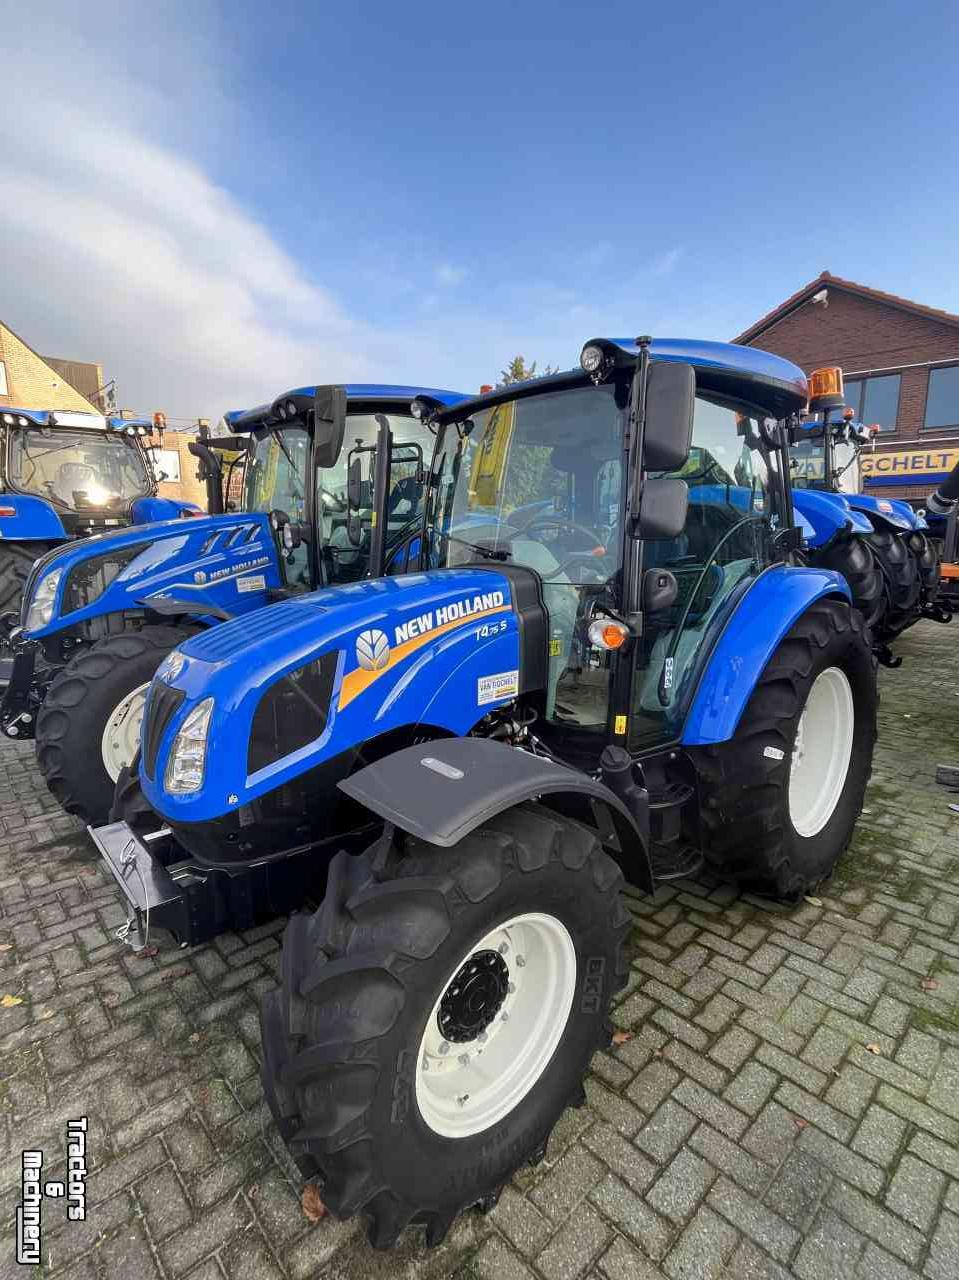 Tracteurs New Holland T4.75s STAGE V